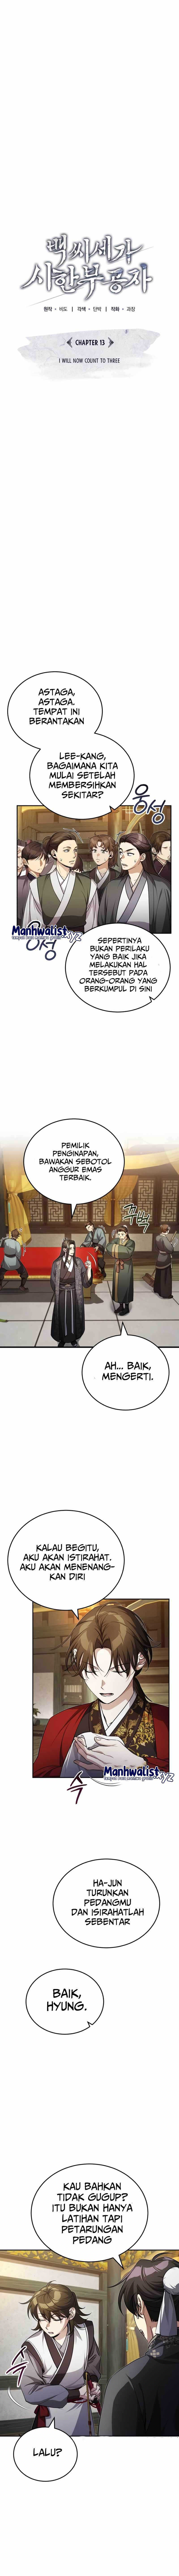 The Terminally Ill Young Master of the Baek Clan Chapter 13